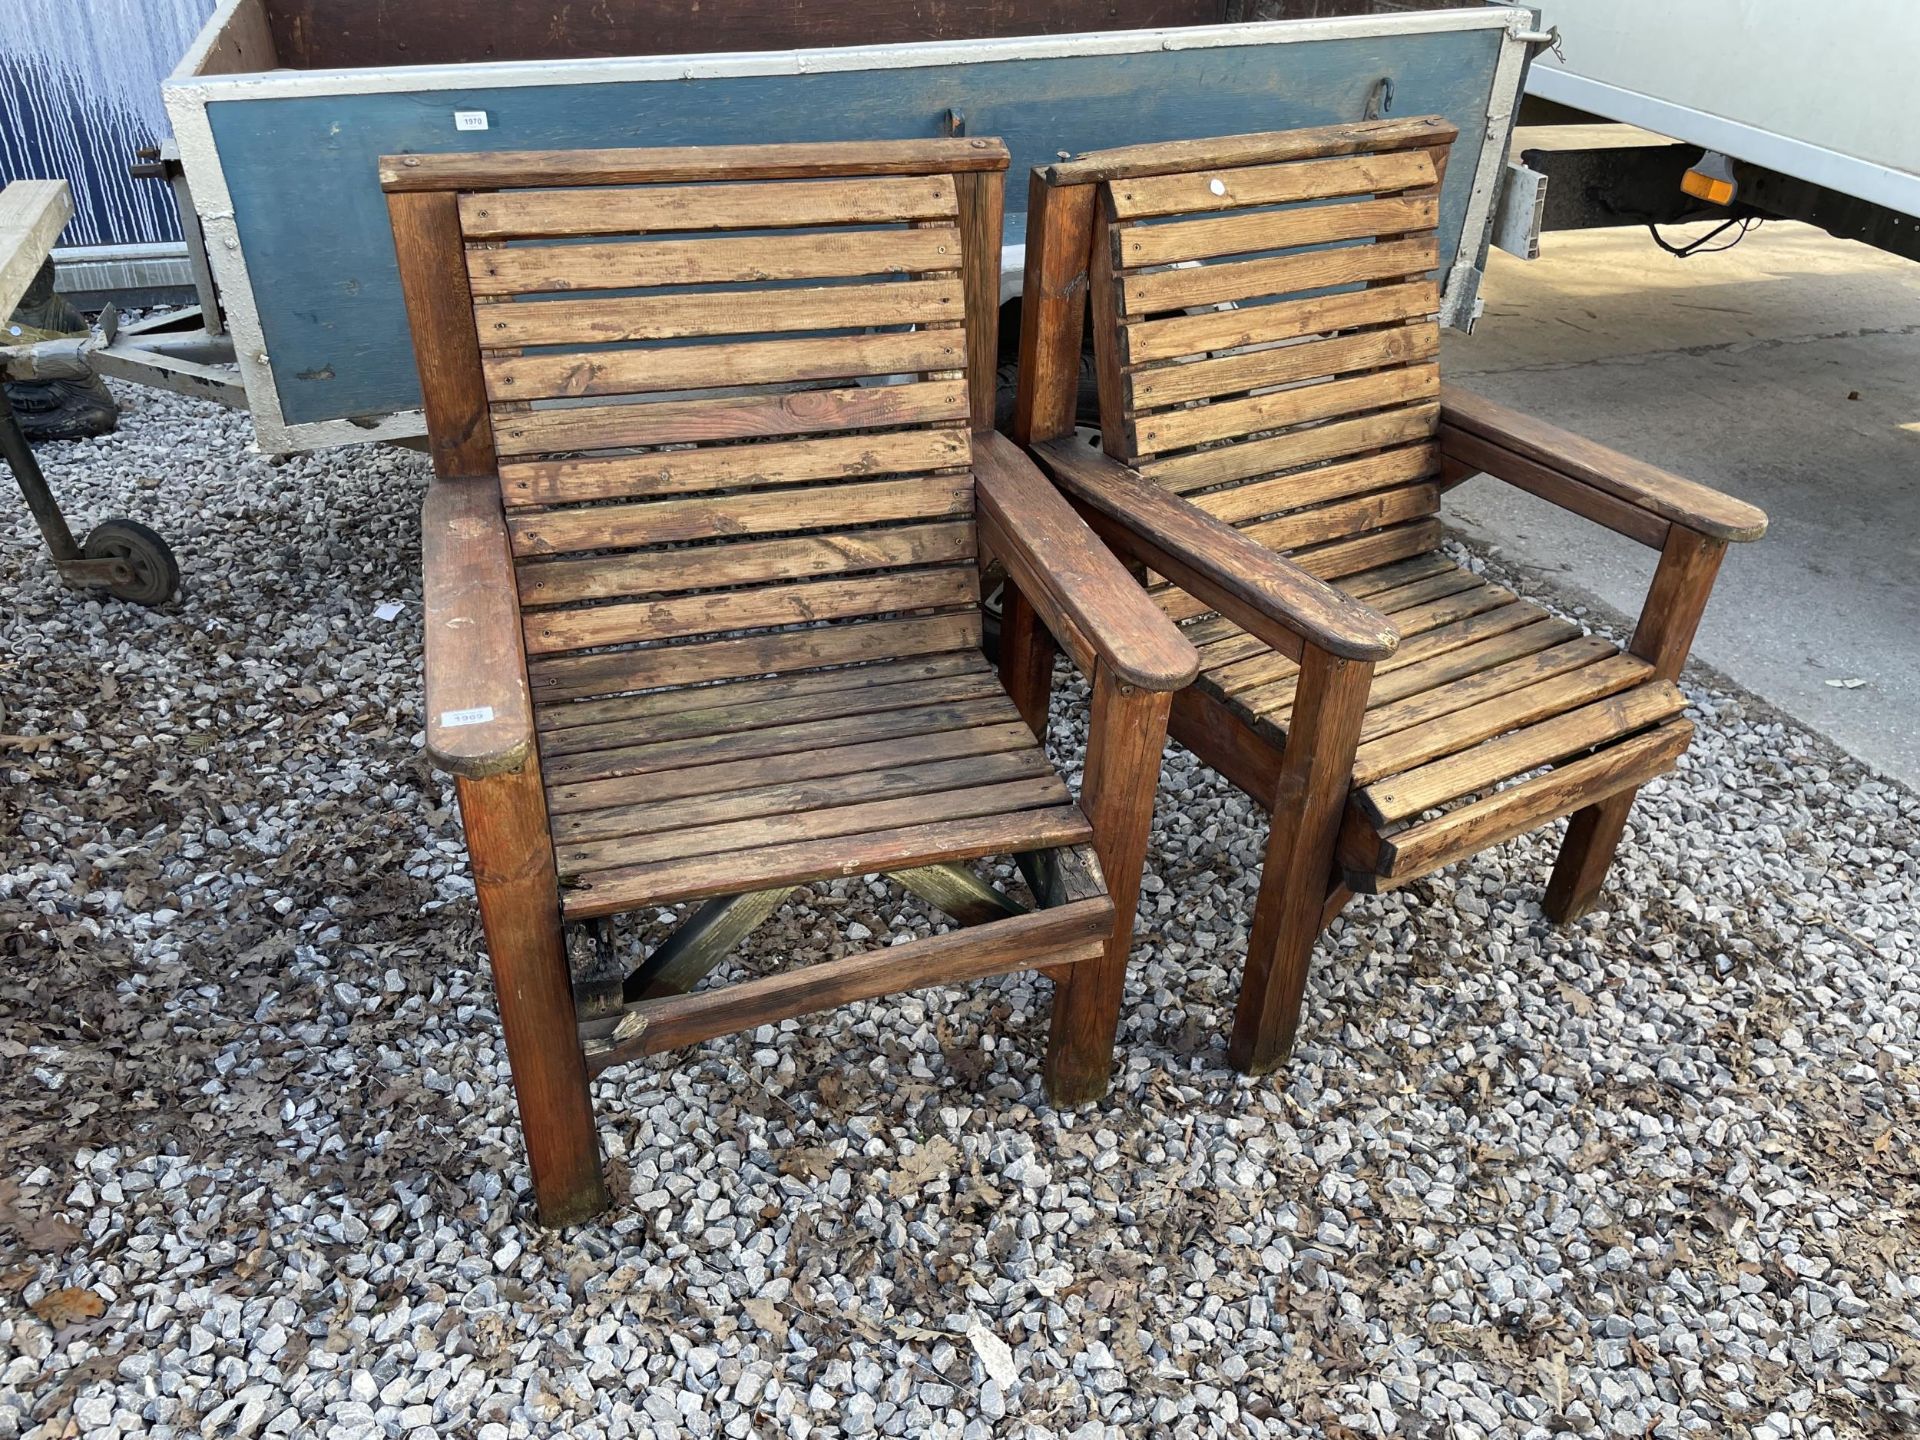 TWO WOODEN SLATTED GARDEN CHAIRS